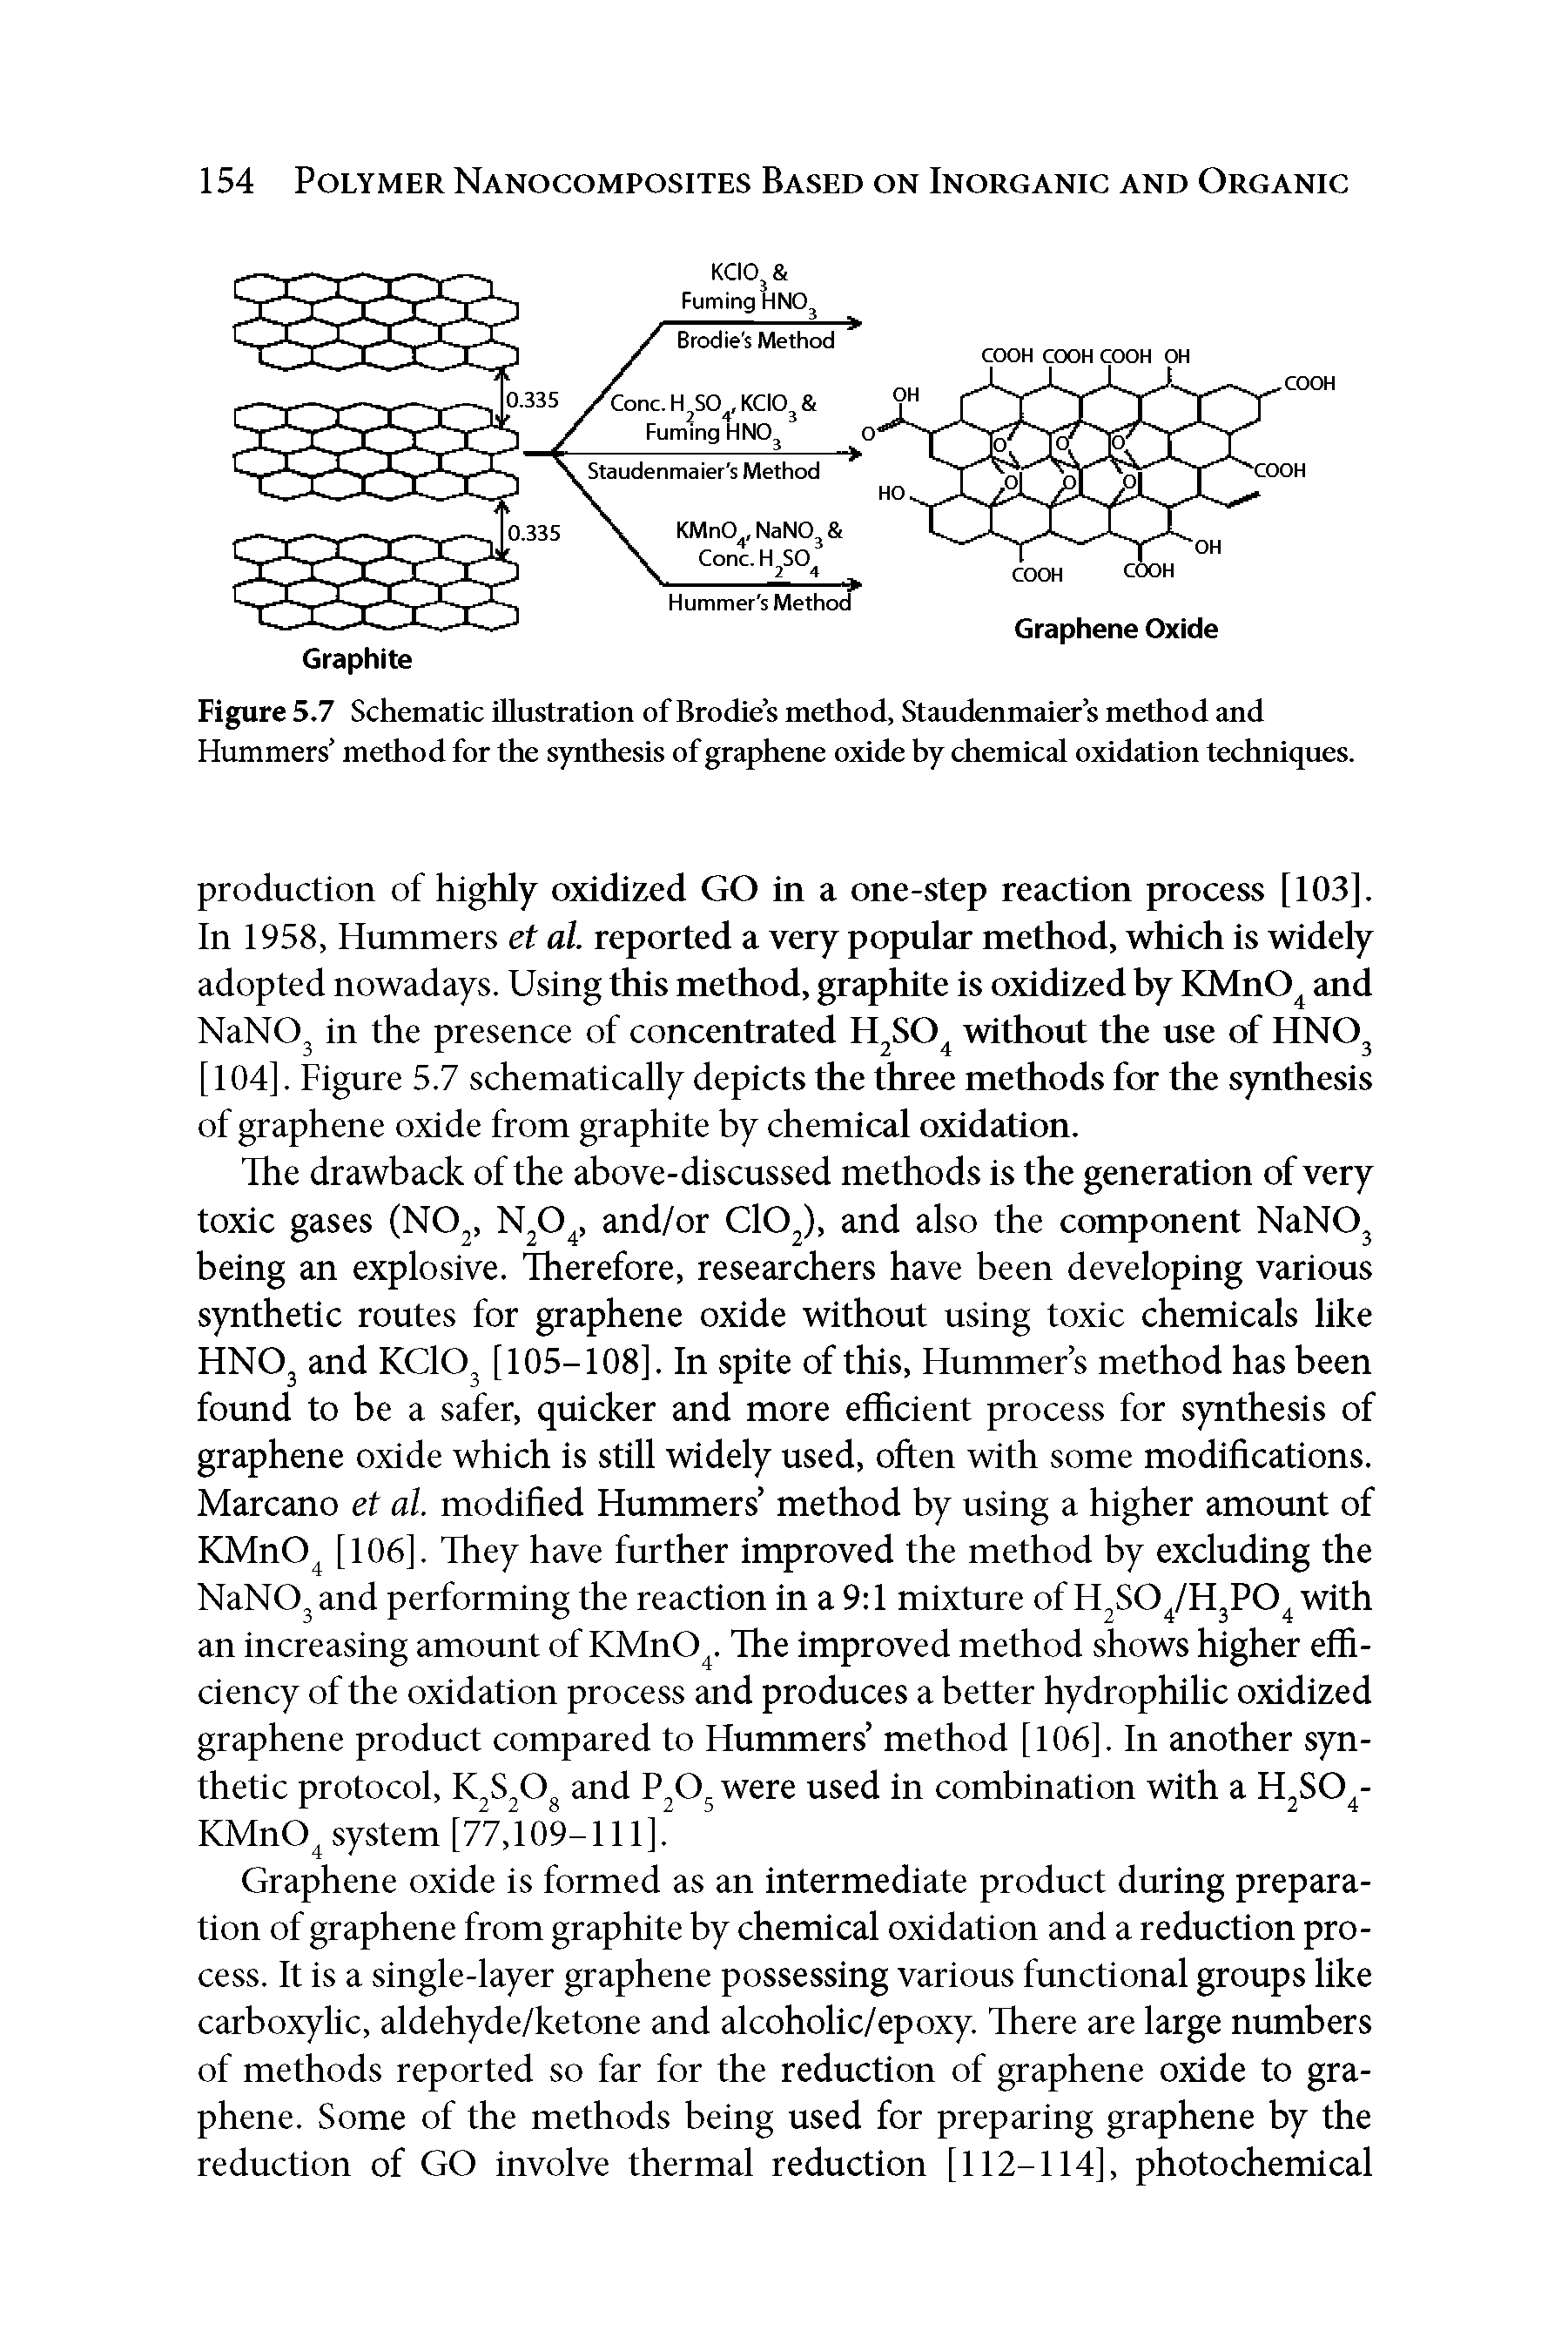 Figure 5.7 Schematic illustration of Brodie s method, Staudenmaier s method and Hummers method for the synthesis of graphene oxide hy chemical oxidation techniques.